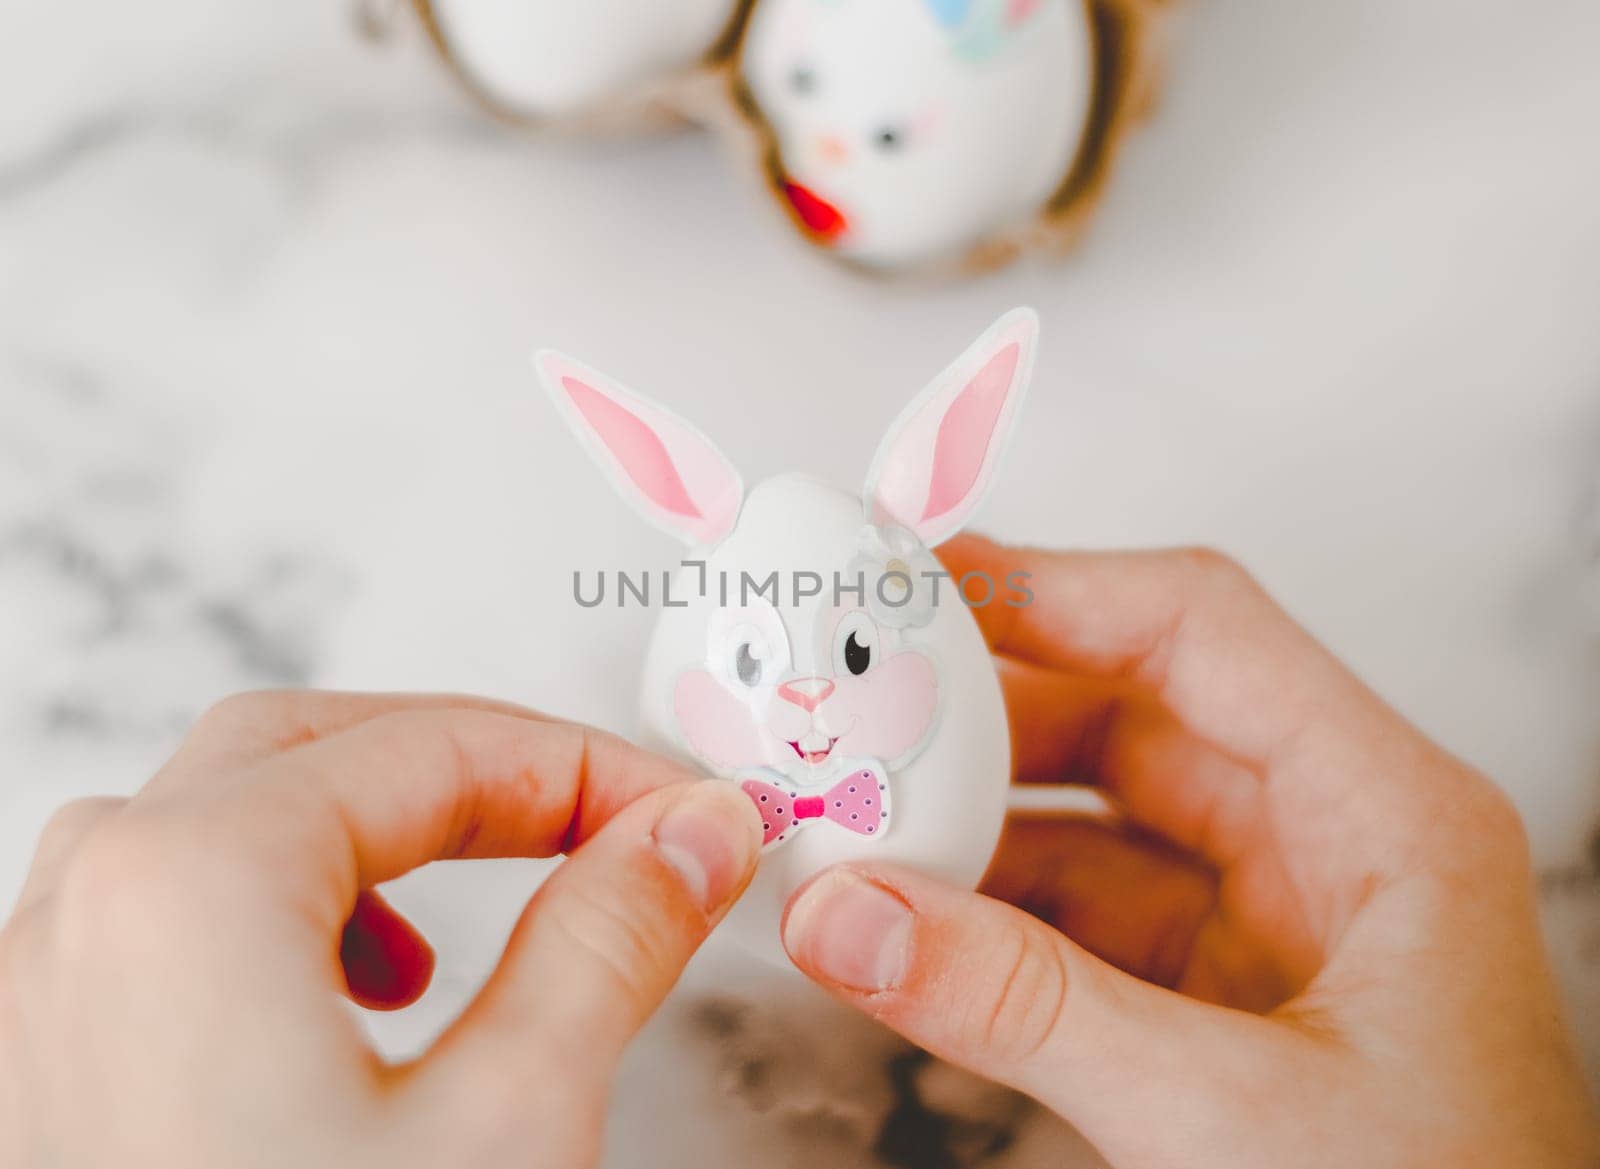 Hands of a caucasian girl pasting bow stickers on an easter bunny egg with ears, sitting at a marble table with depth of field, preparing crafts for the easter holiday, close-up side view. The concept of craft, needlework, at home, diy,children art,artisanal,children creative,step by step.